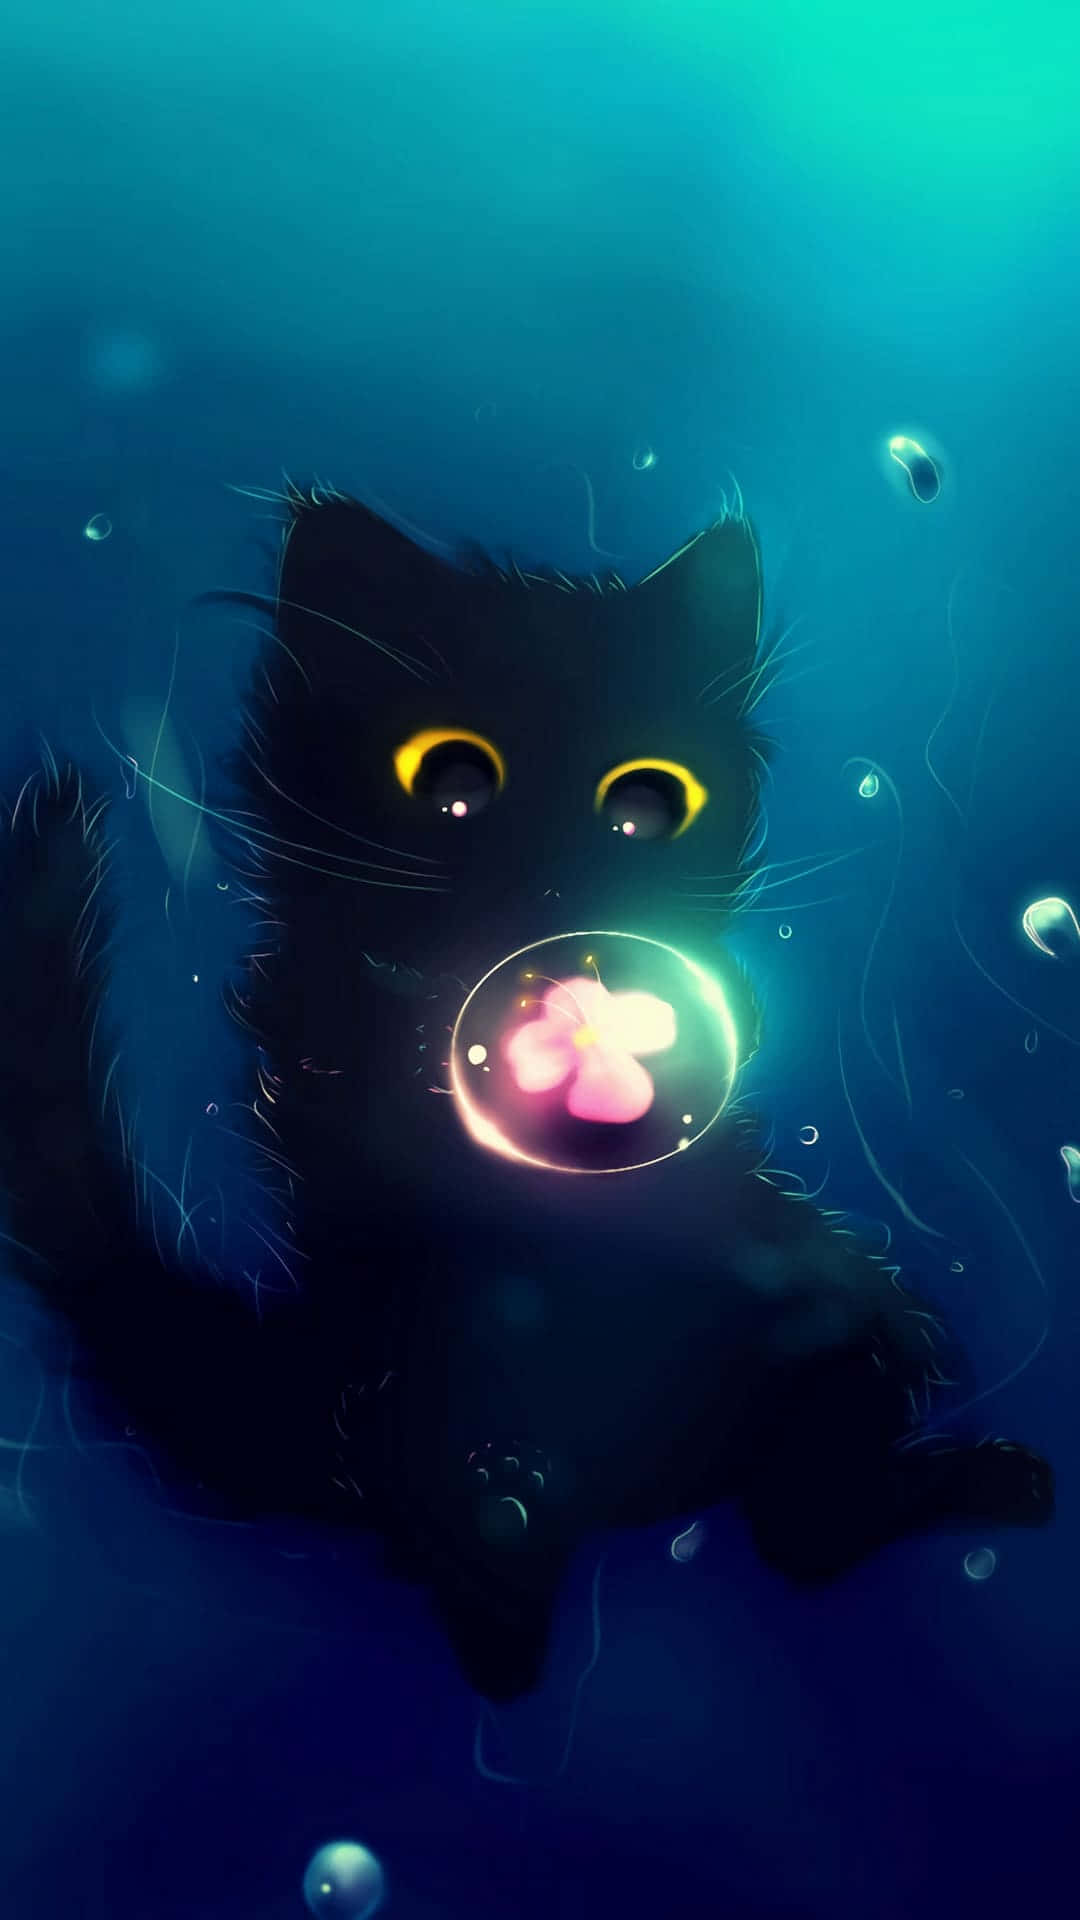 A Black Cat With A Pink Ball In Its Mouth Wallpaper